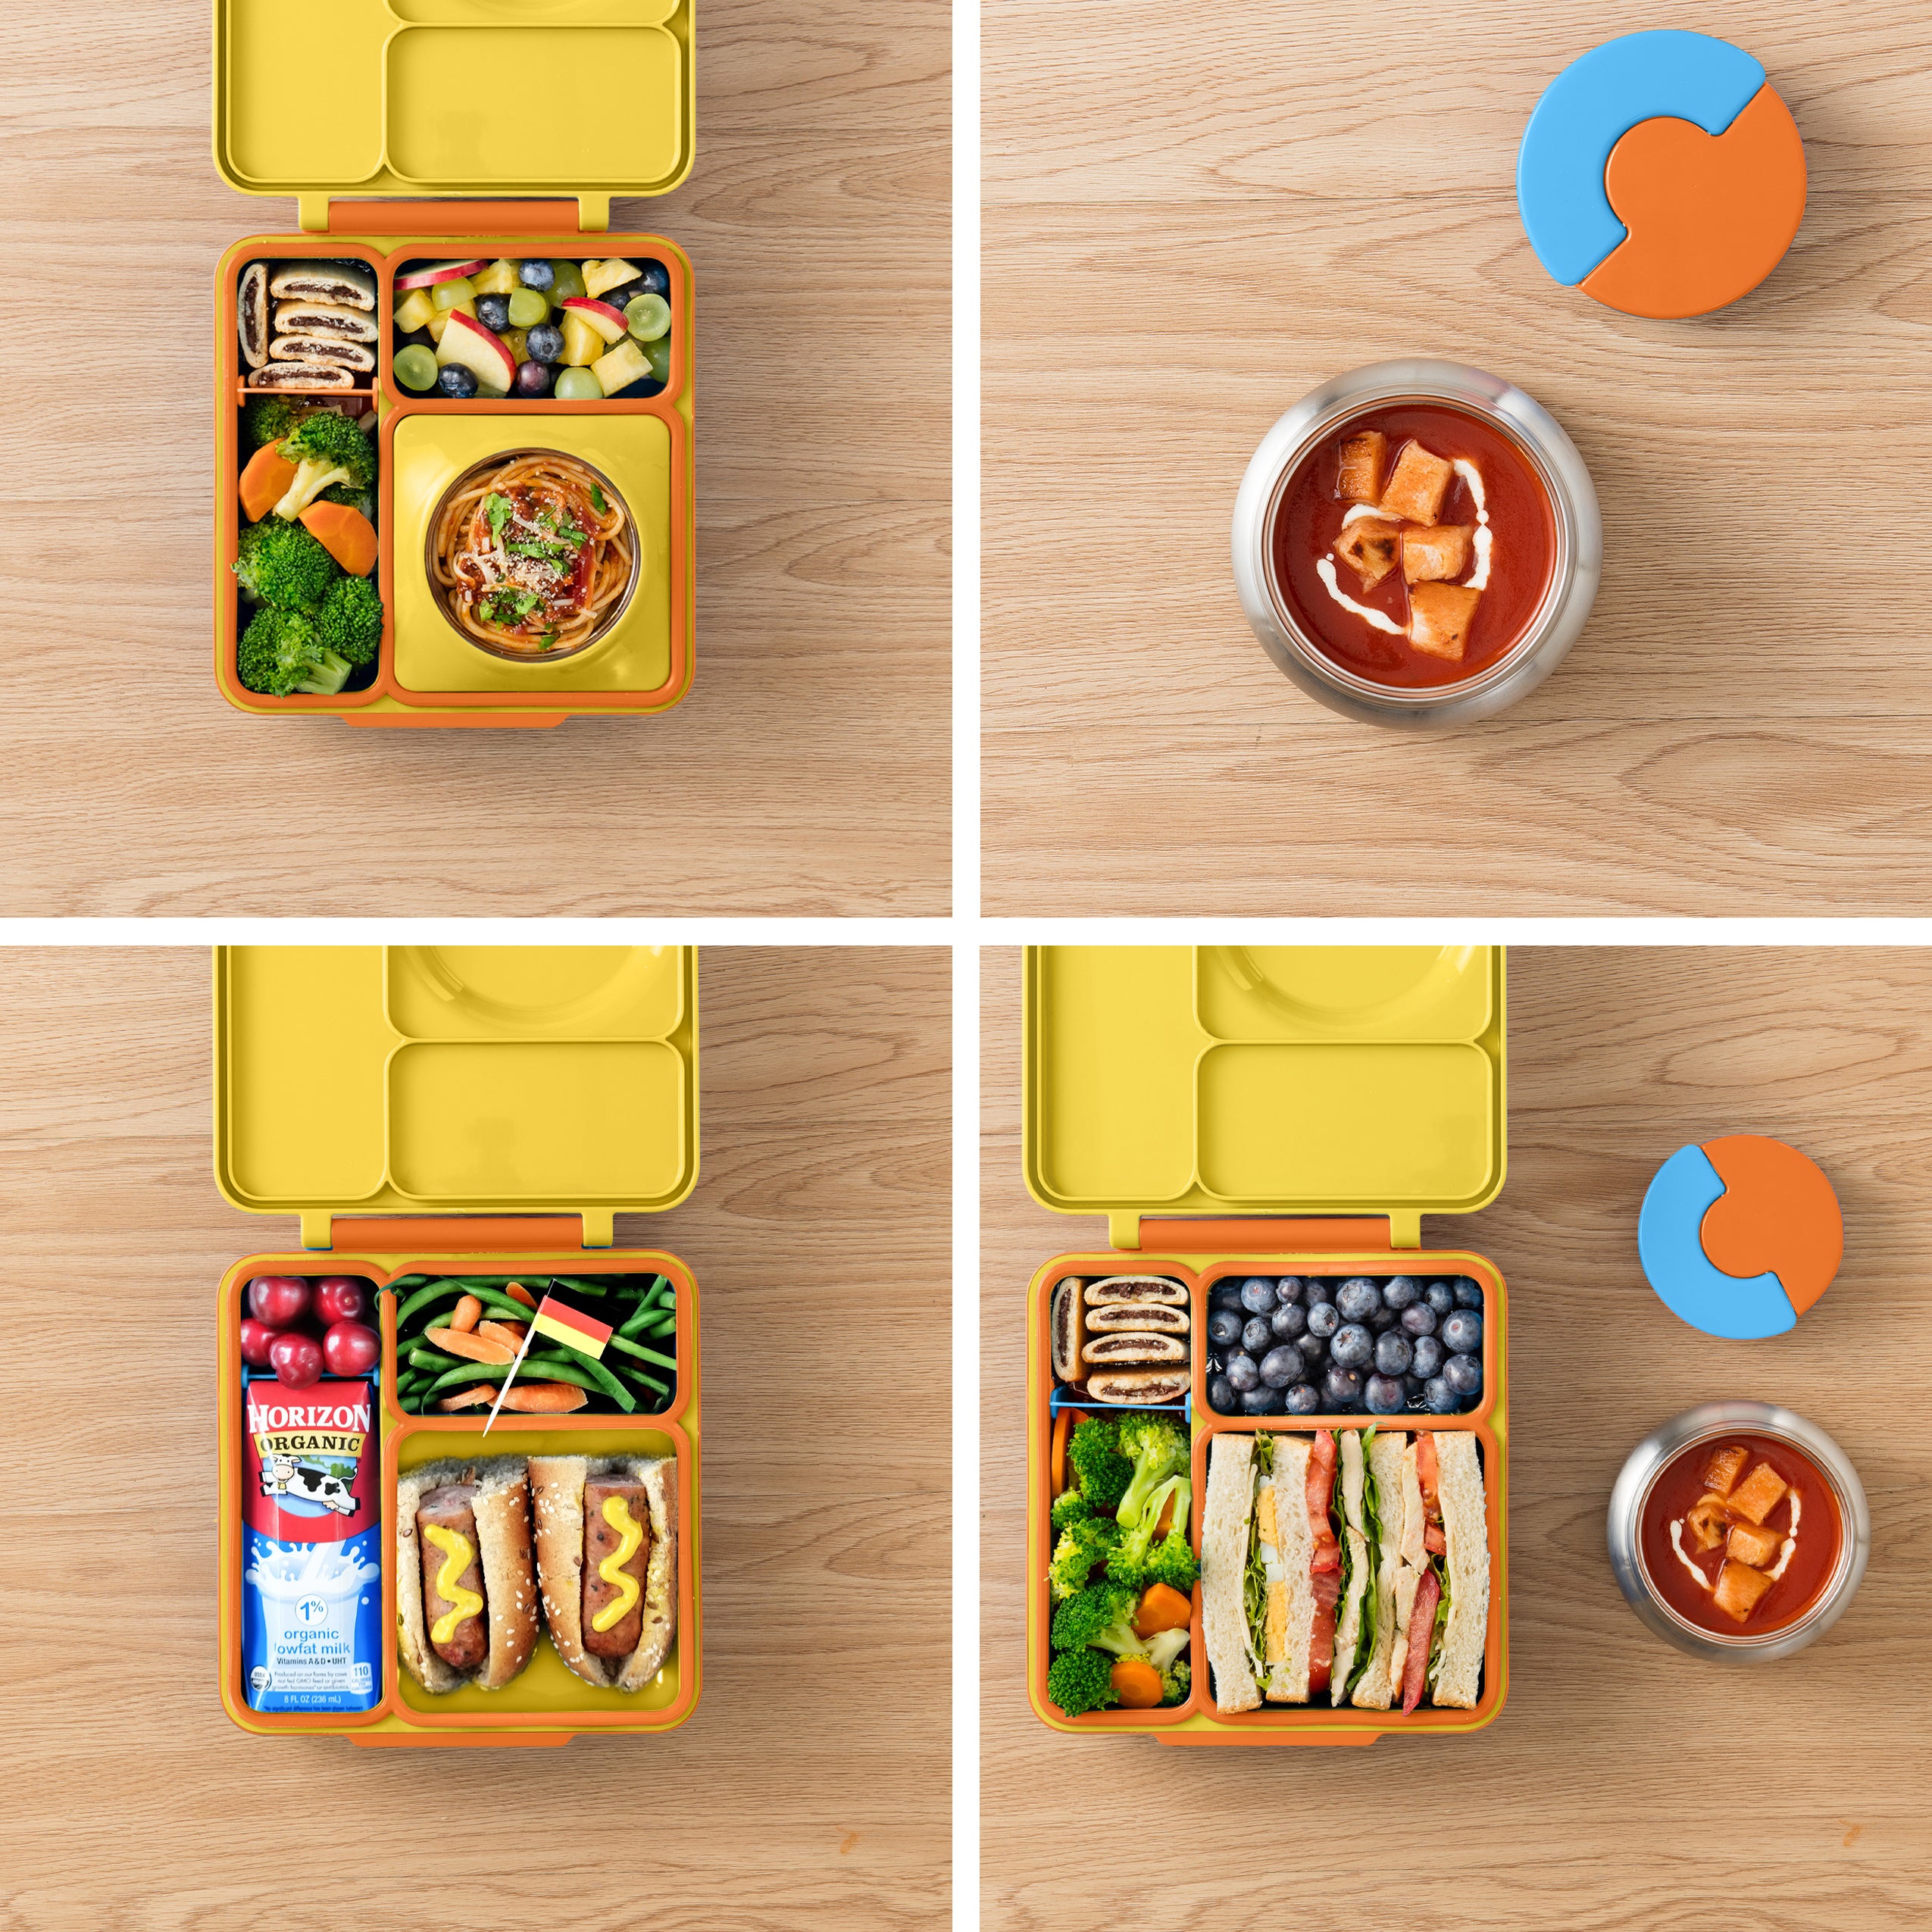 Better Bento Lunch Boxes & Accessories for kids and adults - Caperci